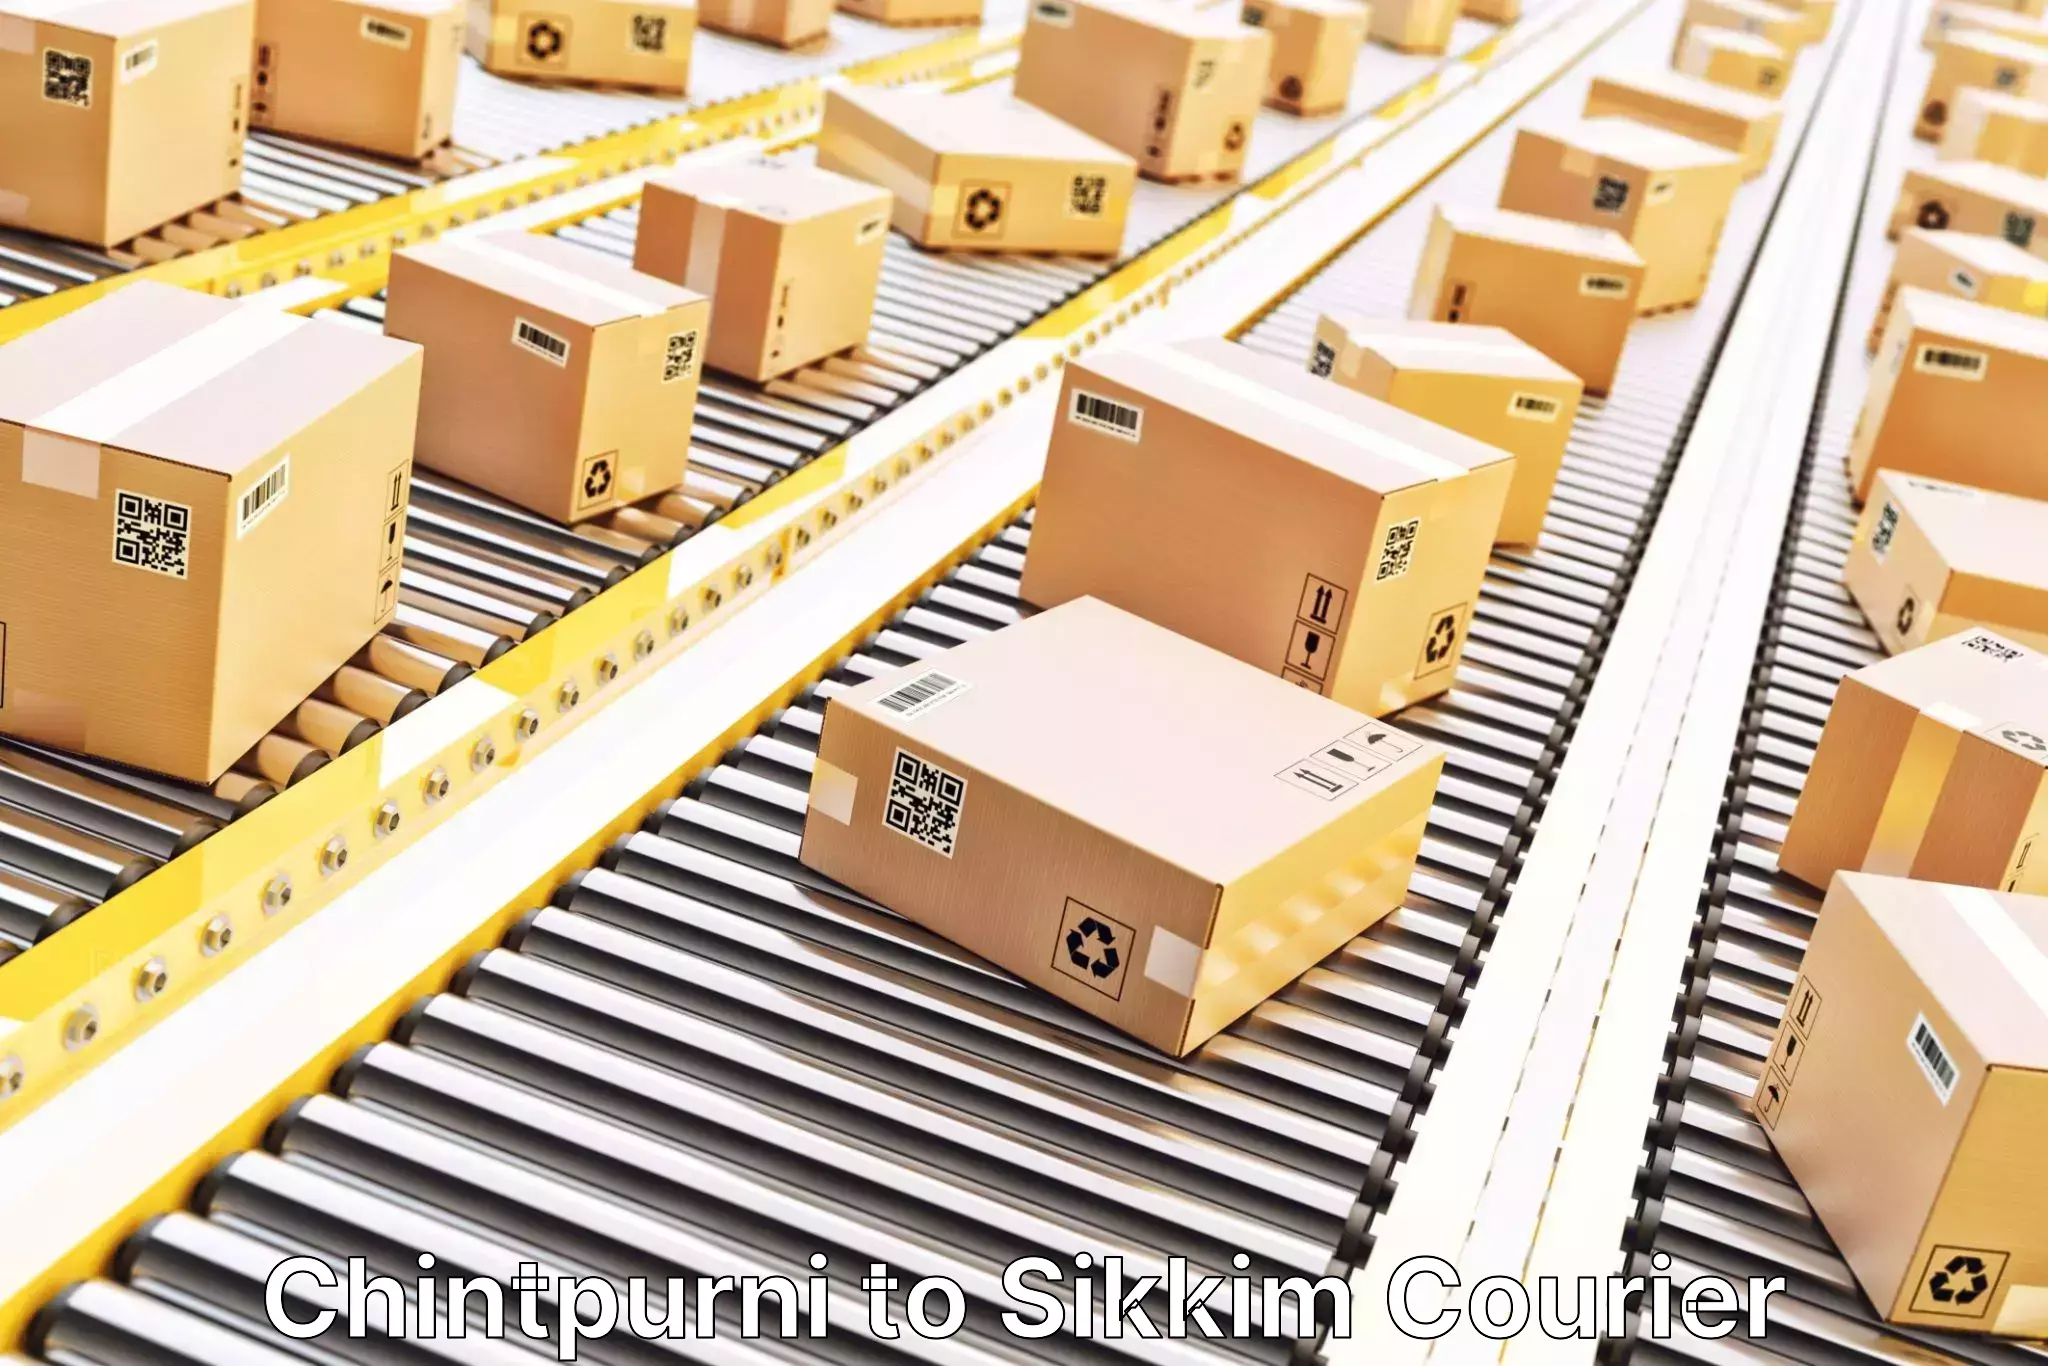 Automated shipping processes Chintpurni to South Sikkim